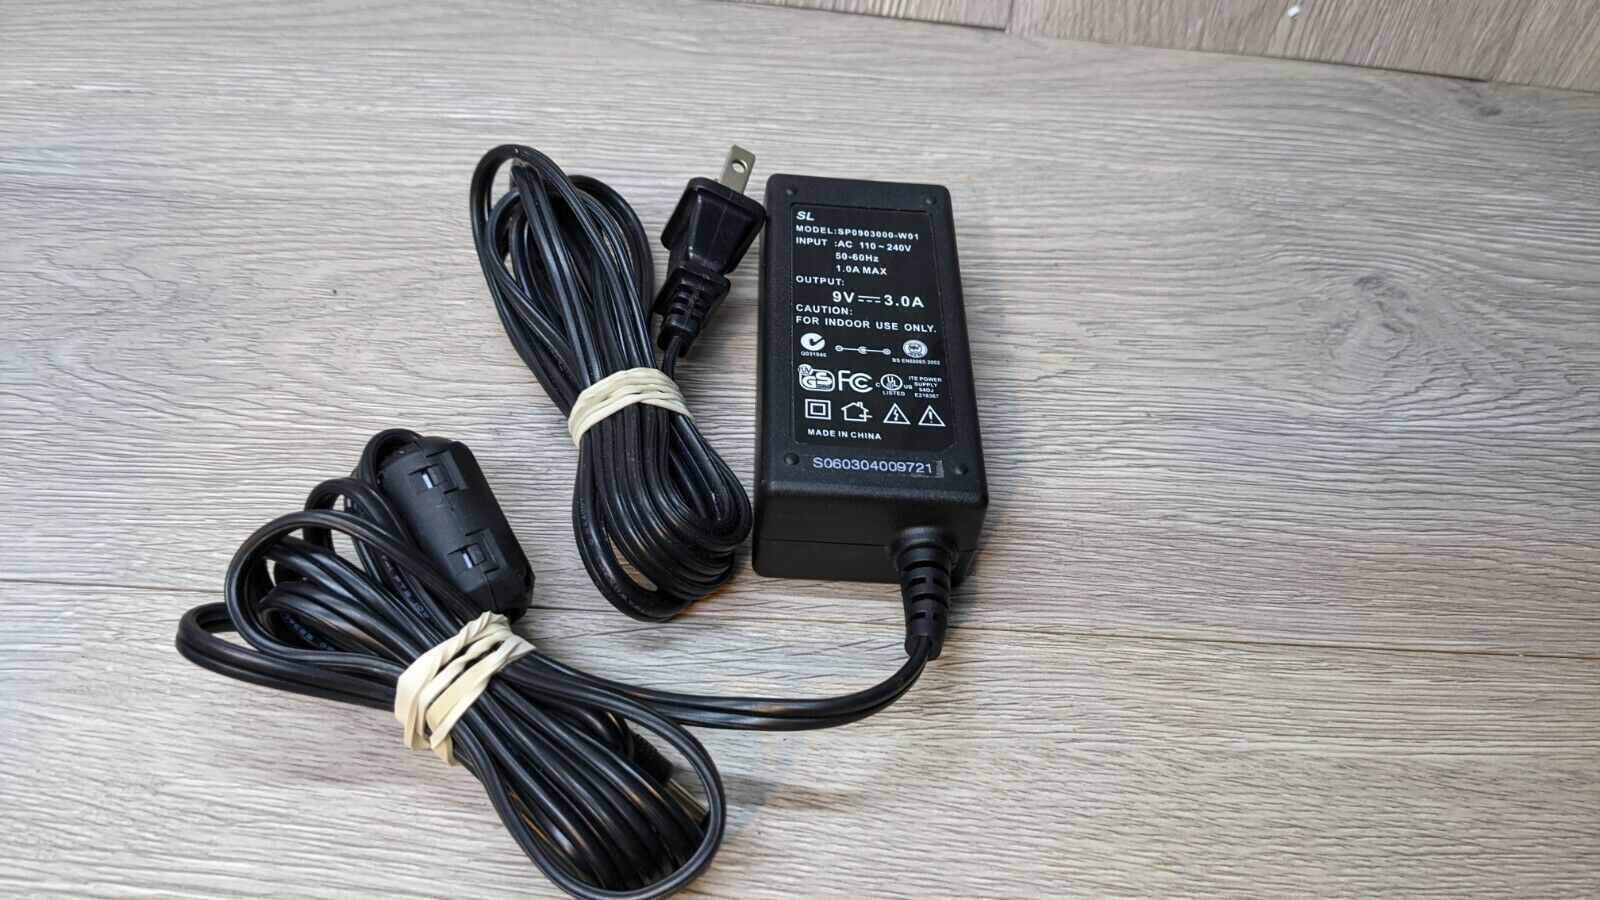 SL SP0903000-W01 AC Adapter Output 9V 2.2A Power Supply Transformer Charger Type: AC/AC Adapter Features: new MPN: D